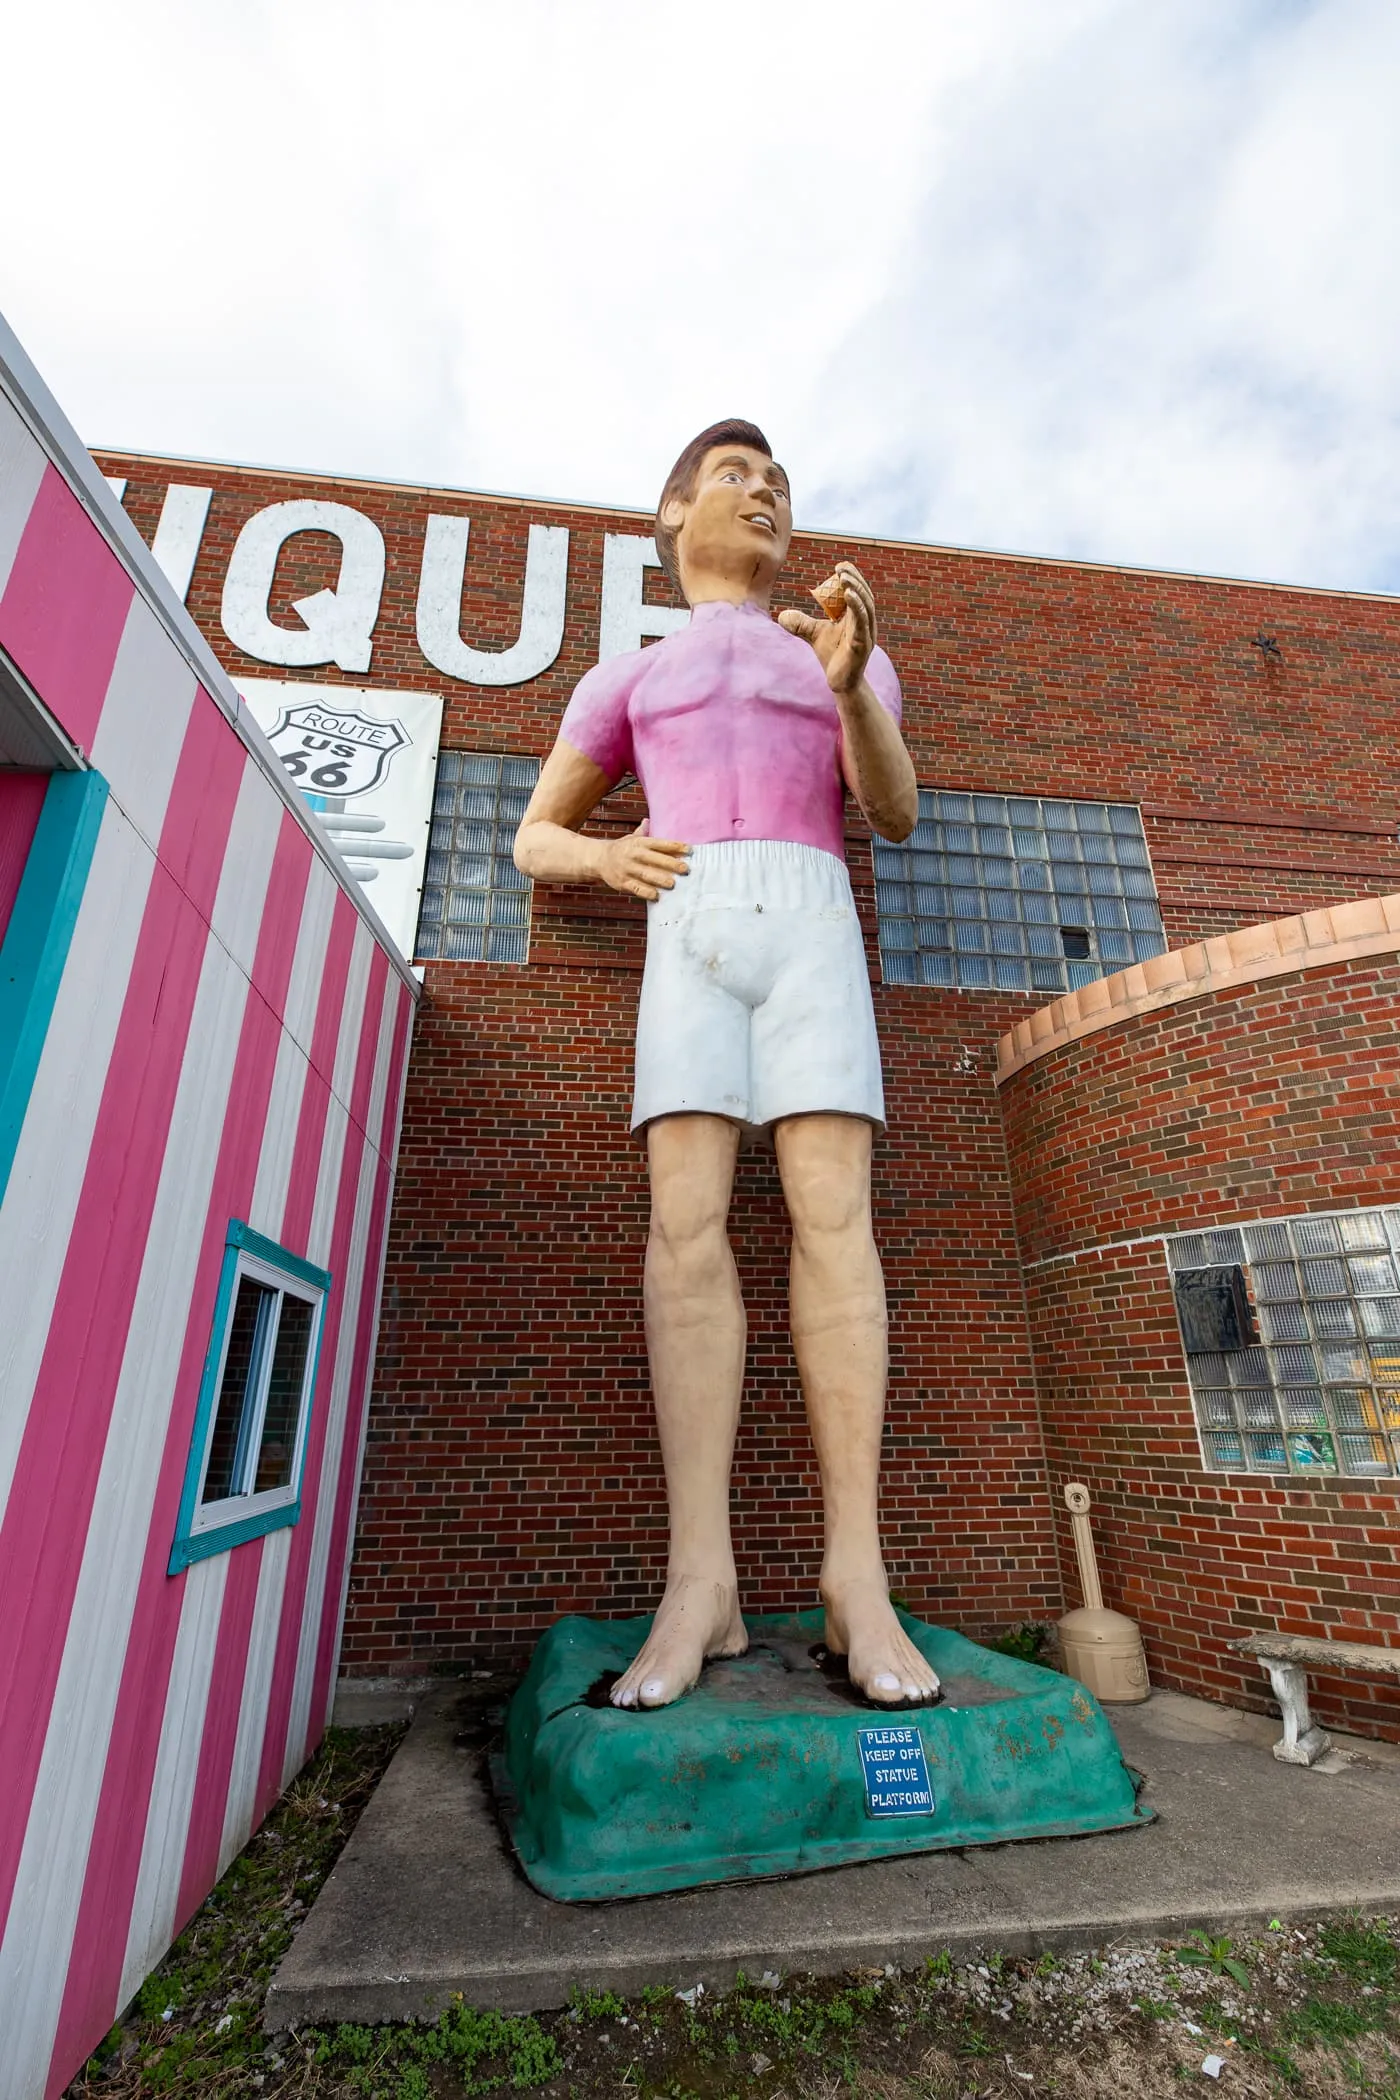 Fiberglass beach guy at the Pink Elephant Antique Mall in Livingston, Illinois - Route 66 Roadside Attraction